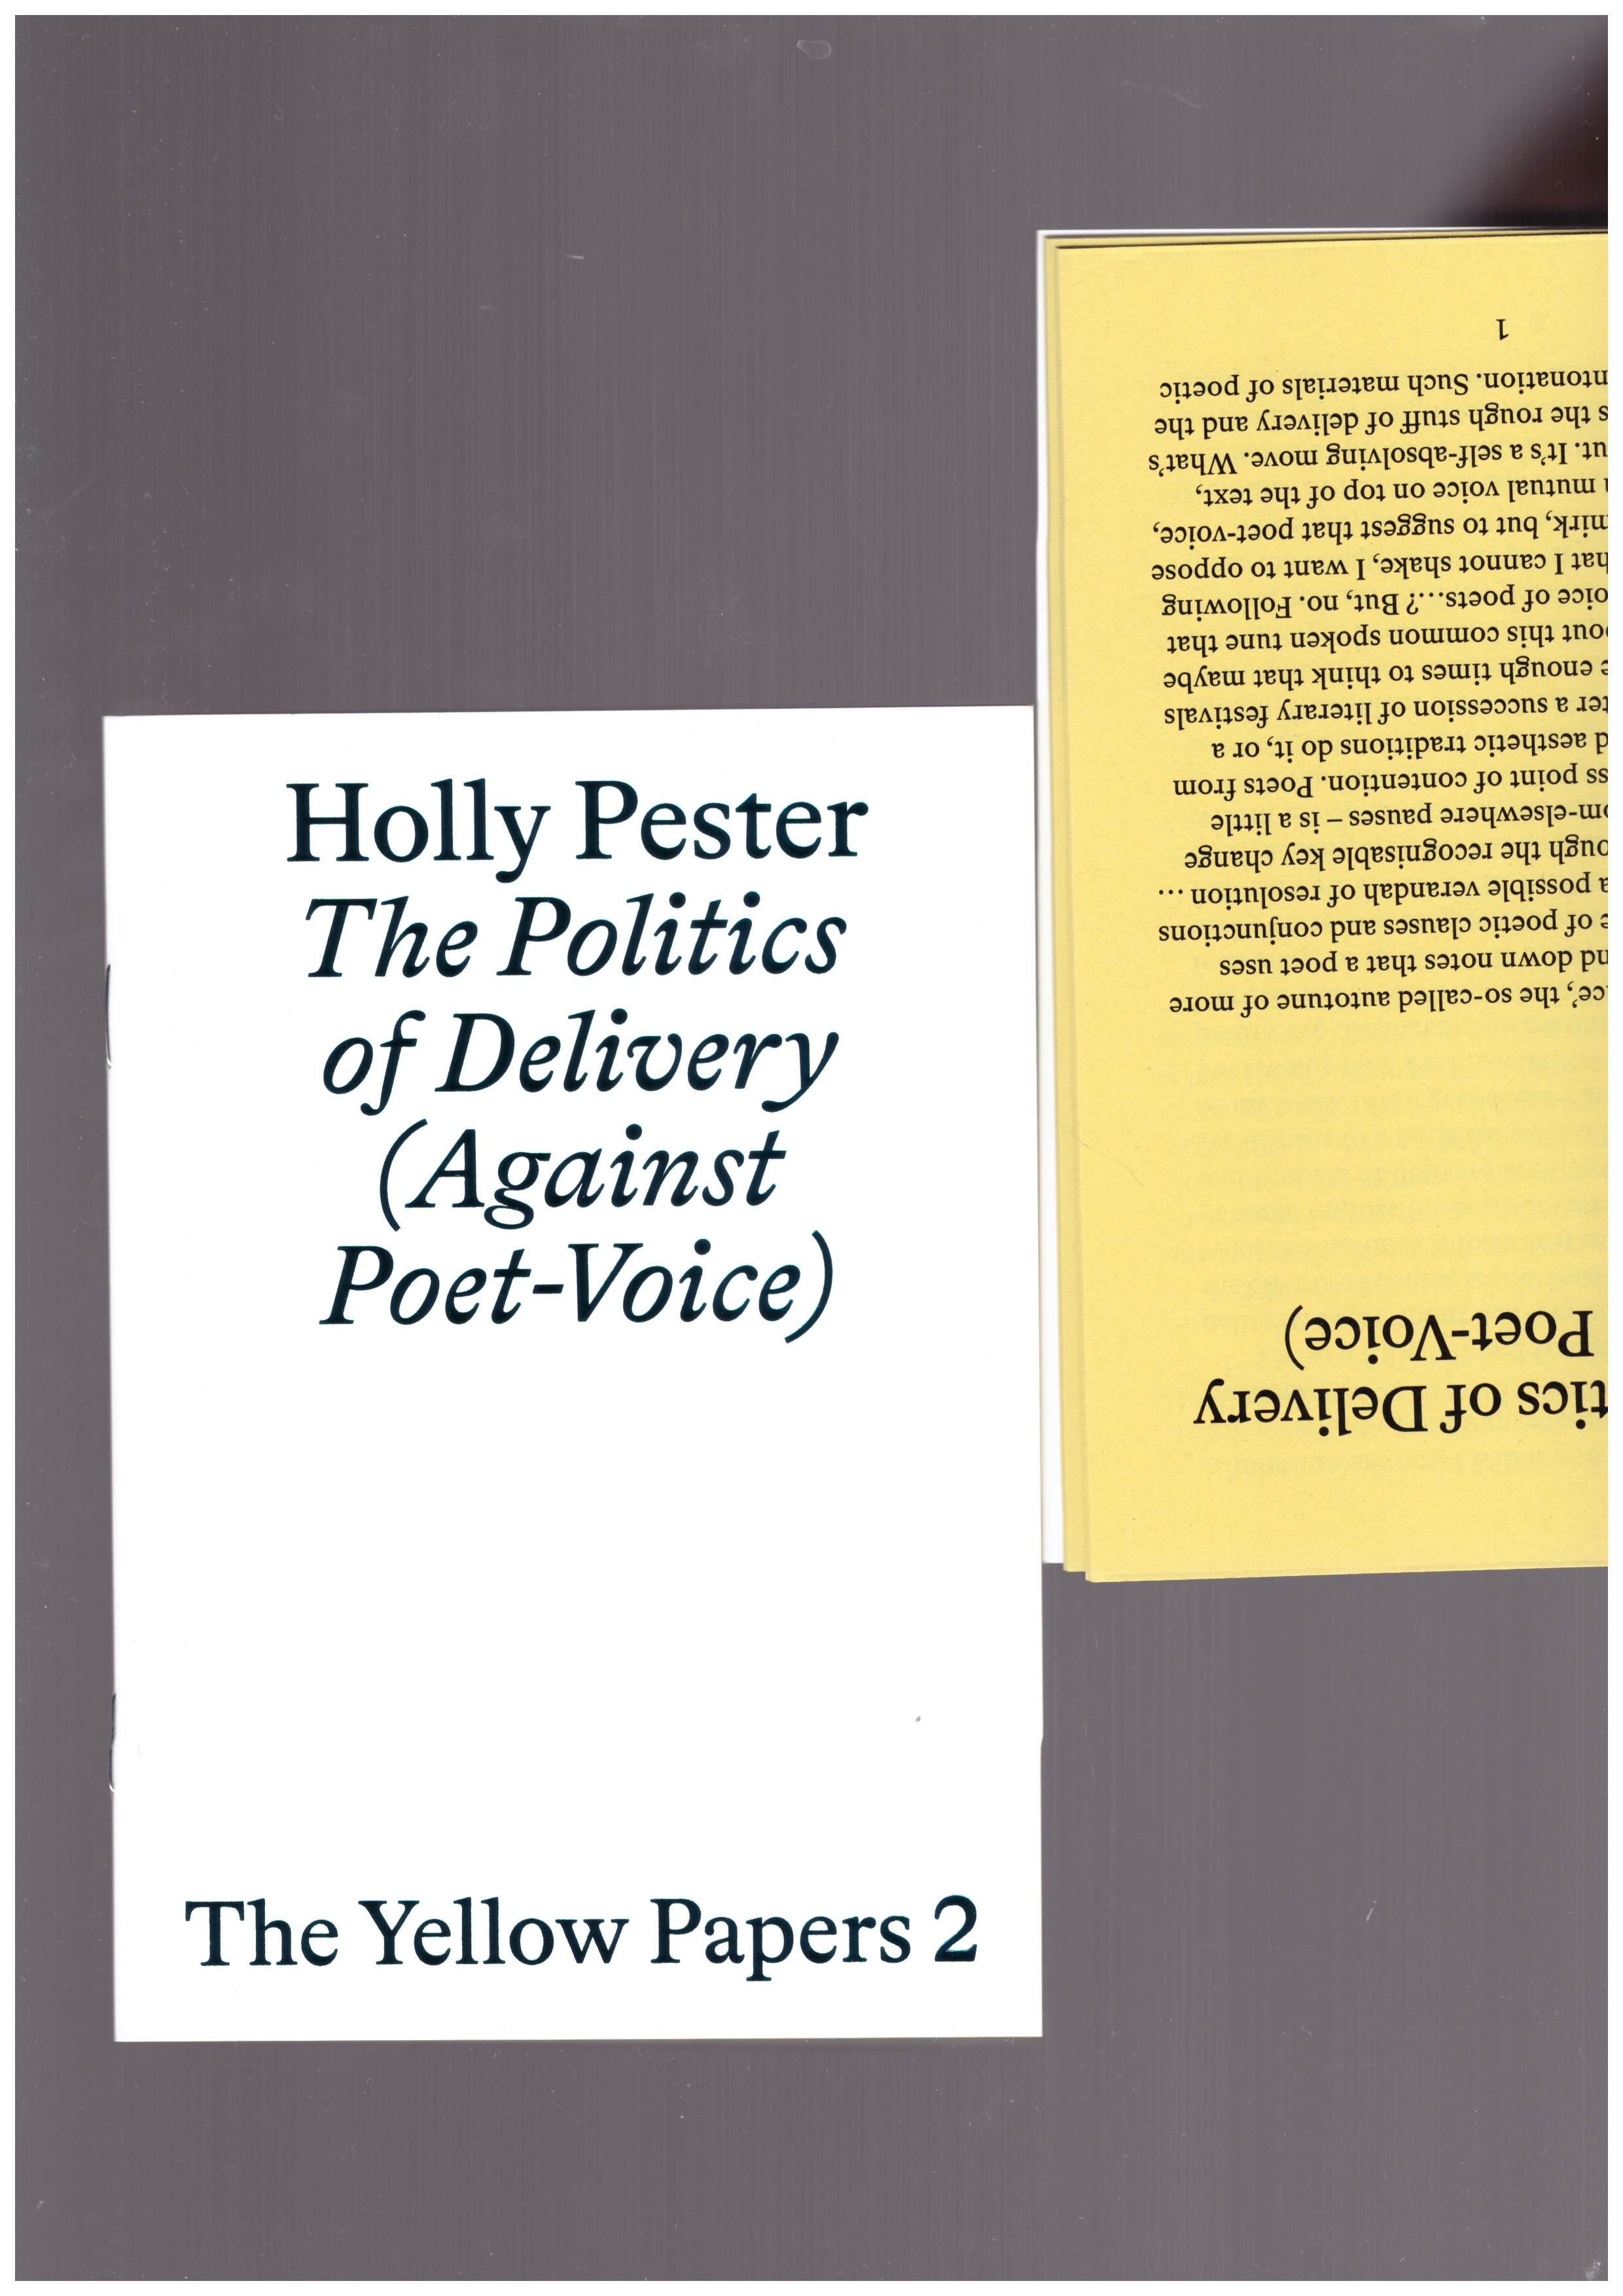 PESTER, Holly - The Yellow Papers 2. The Politics of Delivery (Against Poet-Voice)